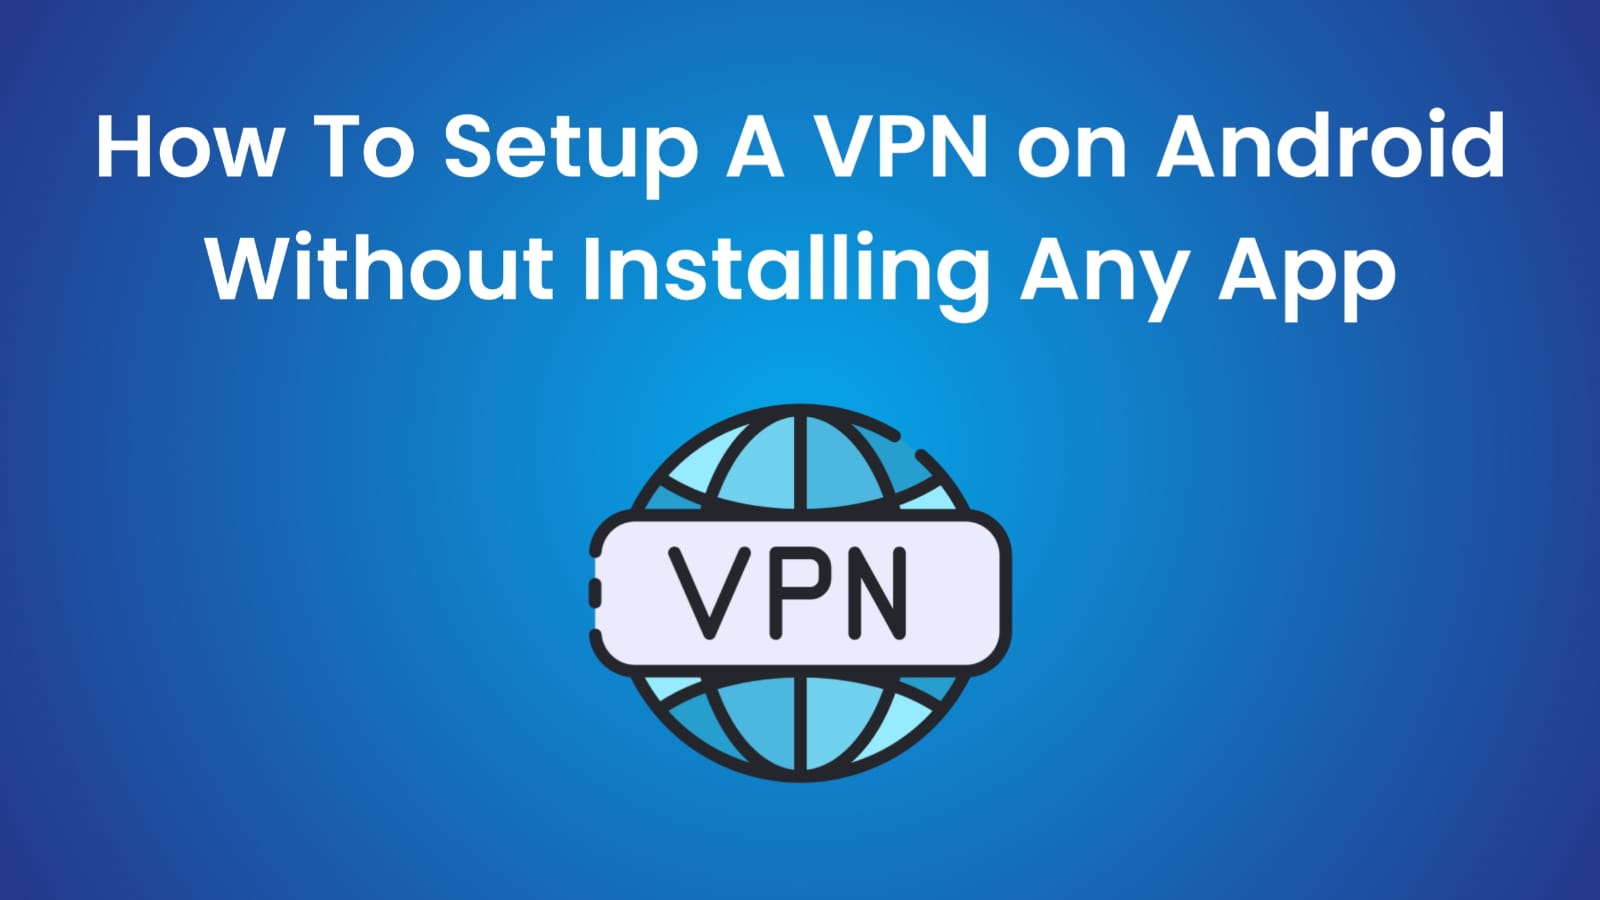 How To Setup A VPN on Android